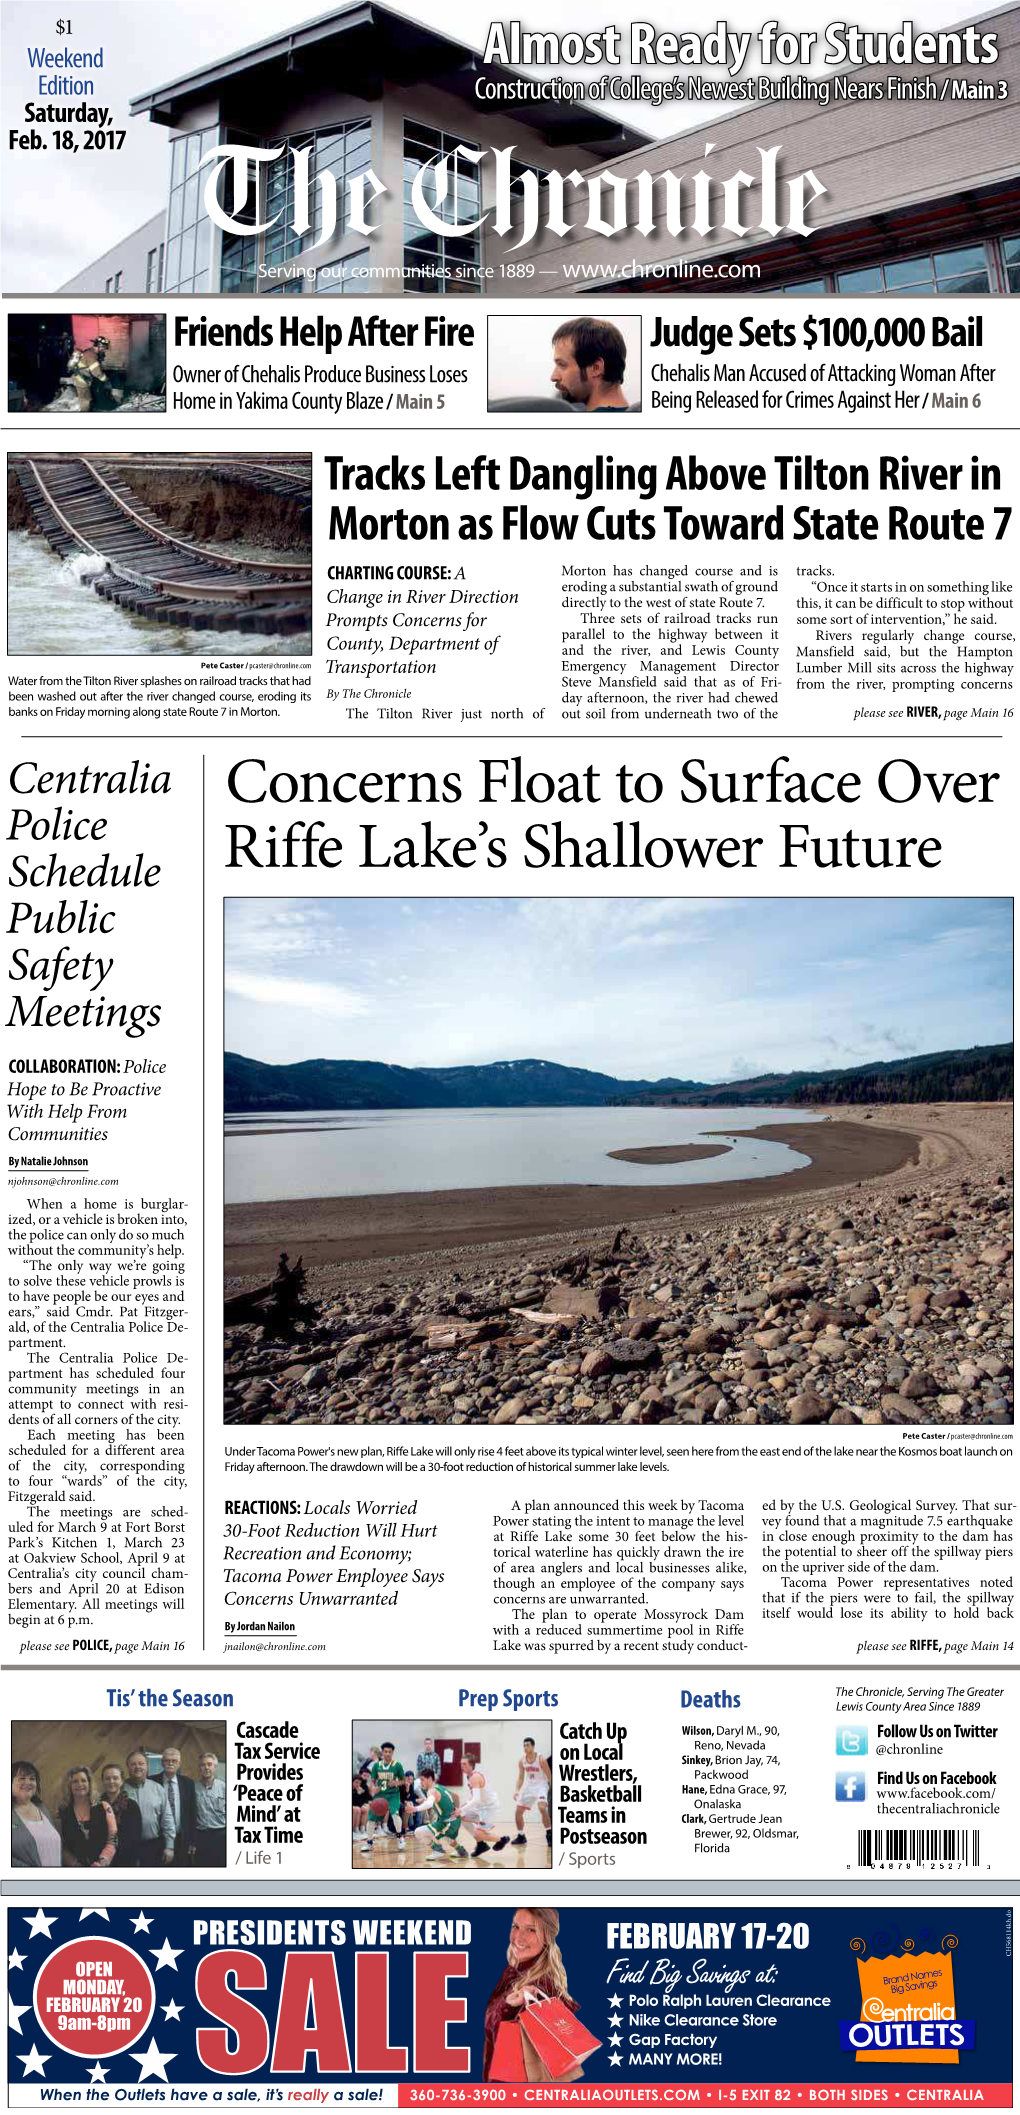 Concerns Float to Surface Over Riffe Lake's Shallower Future